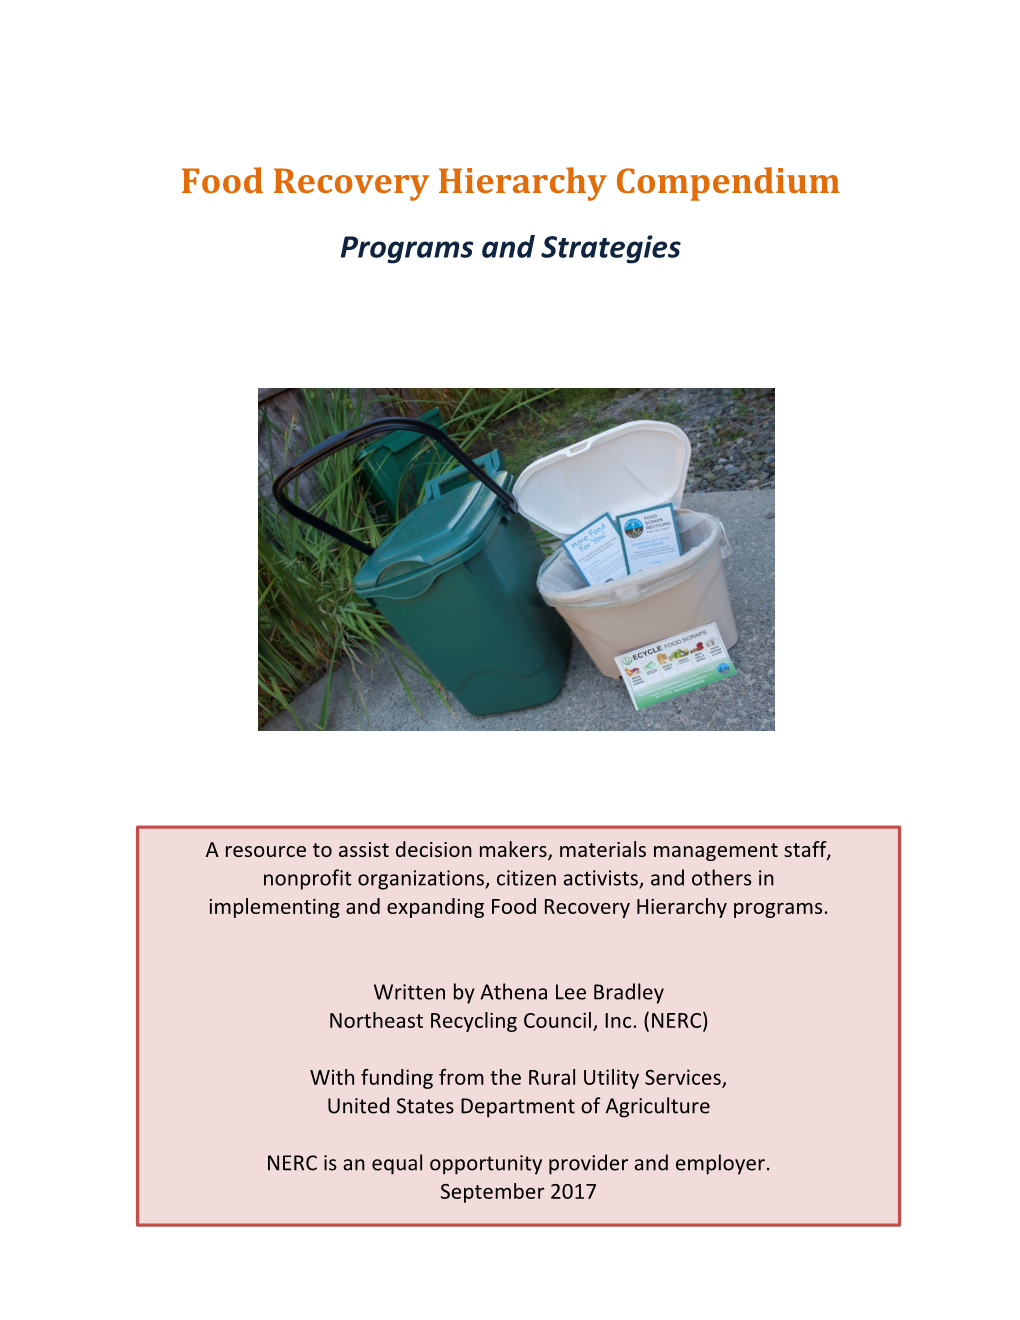 Food Recovery Hierarchy Compendium